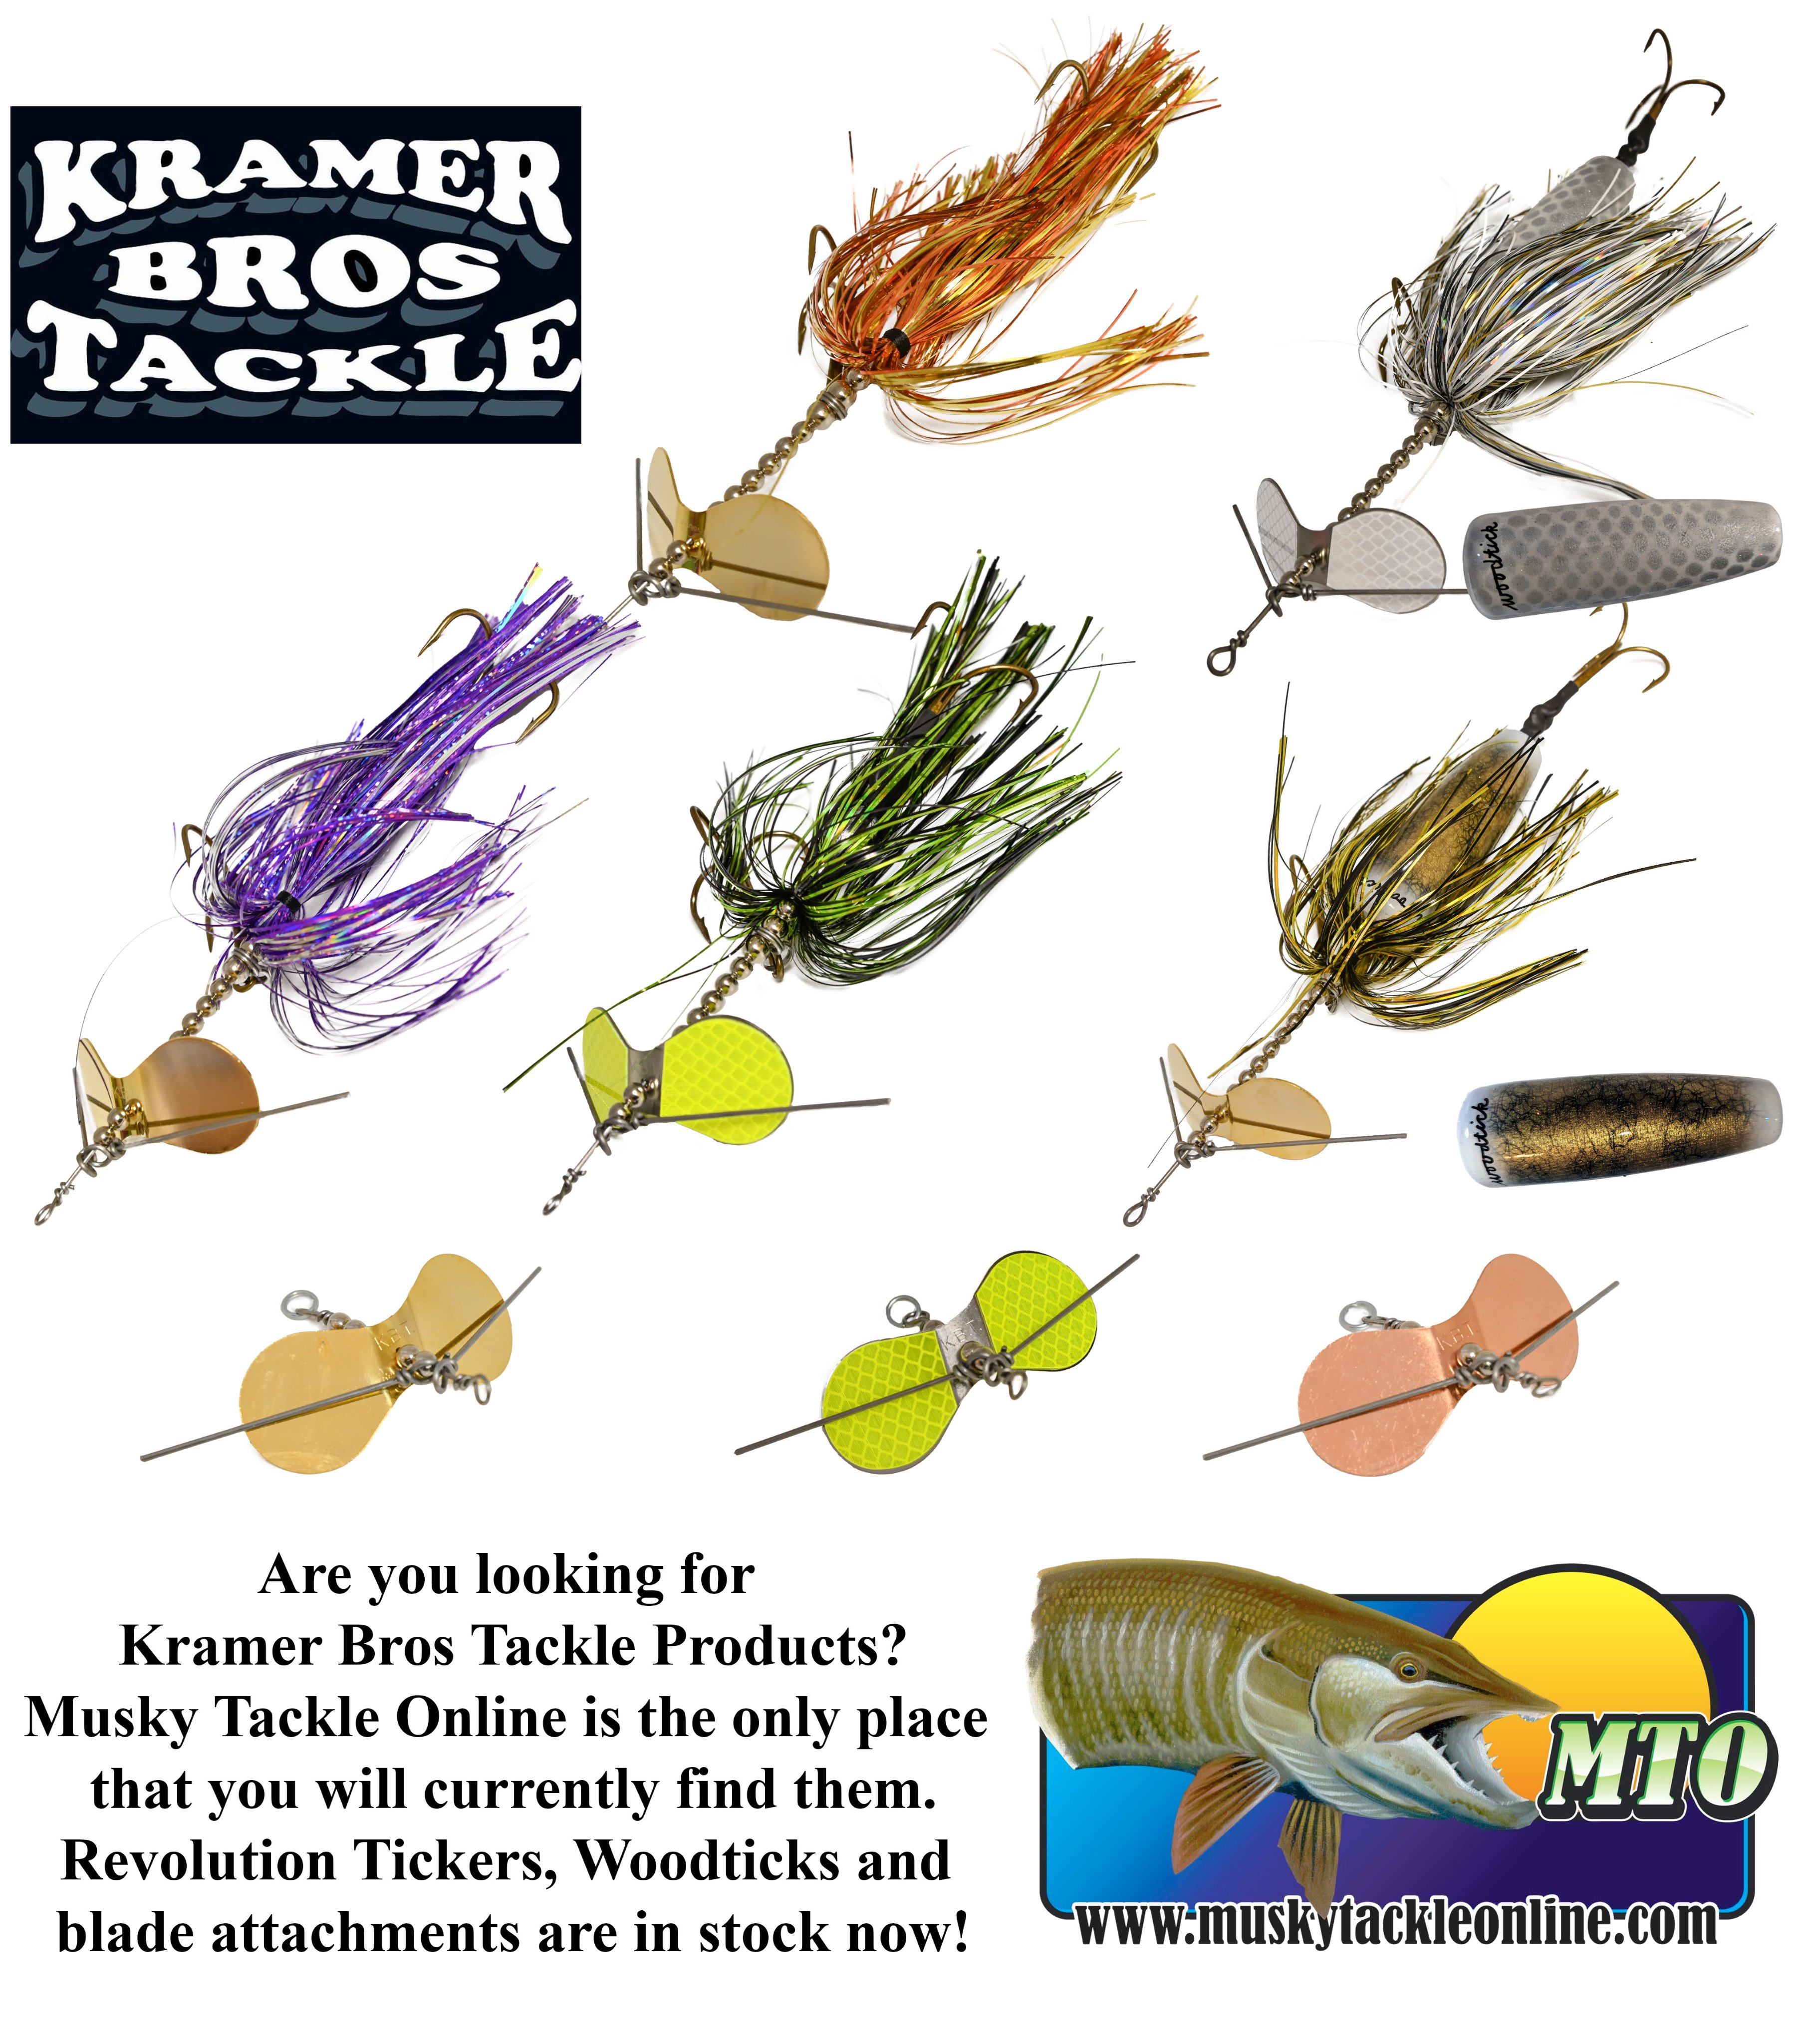 Musky Tackle Online (@MTO_Musky) / X